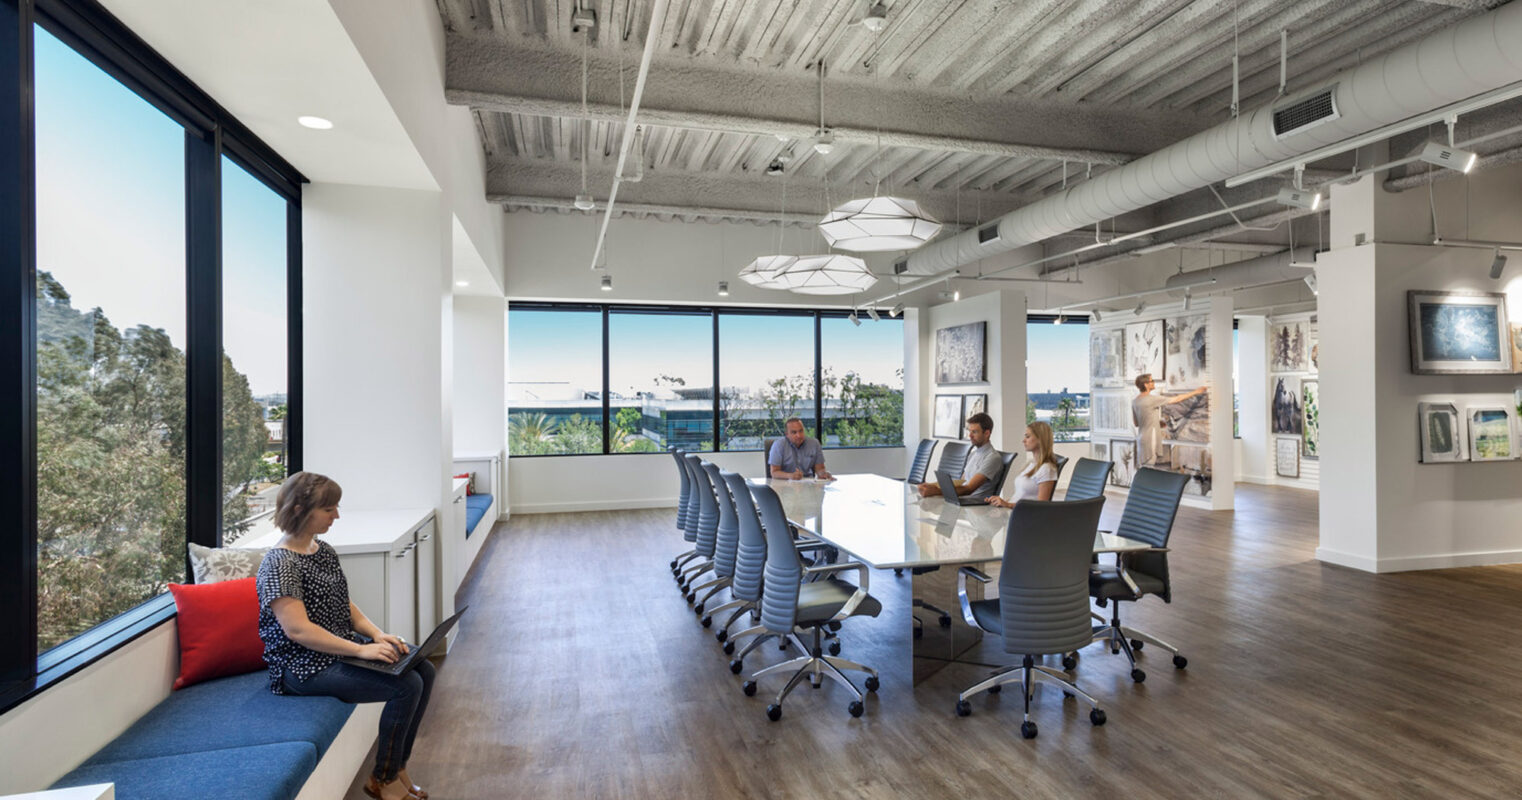 Modern office space boasting exposed concrete ceiling and ductwork, with floor-to-ceiling windows offering natural light and a view of greenery. Sleek, linear lighting fixtures complement a long conference table, while colorful artwork adds visual interest along a neutral-toned wall.